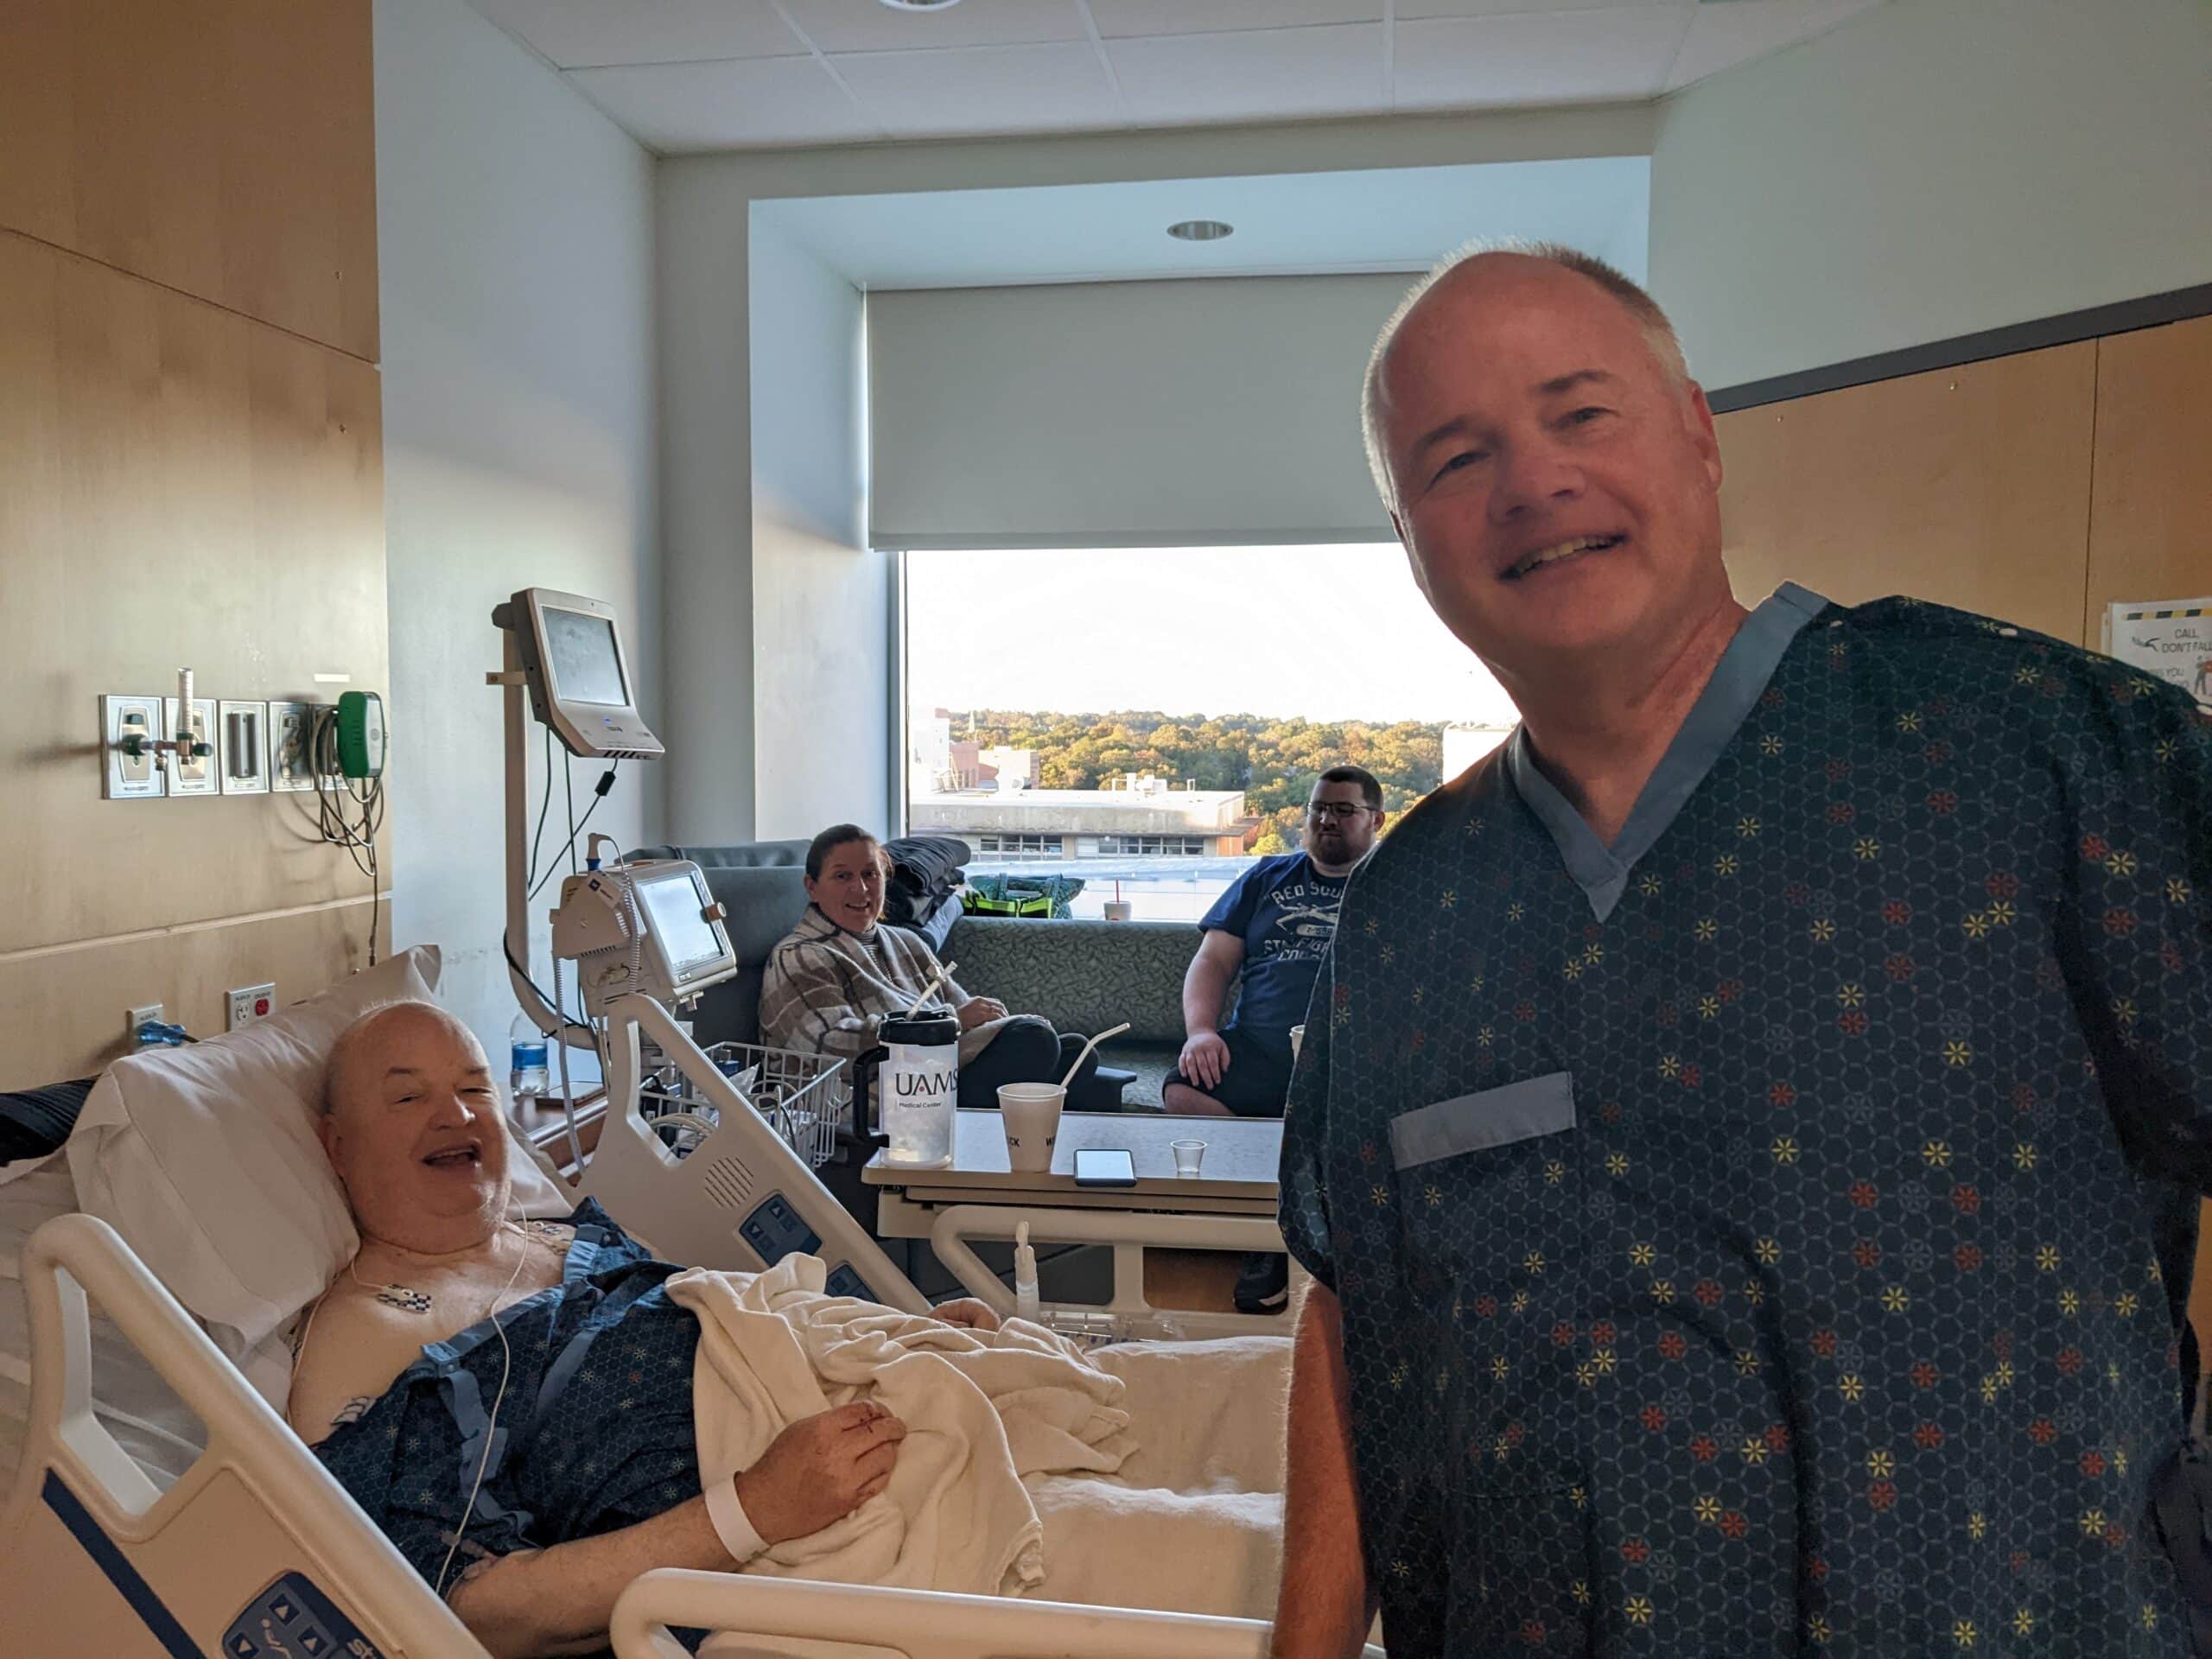 Steve Arhur, standing, in hospital gown, visits with John Arthur, M.D., in a patient bed, after the surgery in which Steve donate a kidney to John.